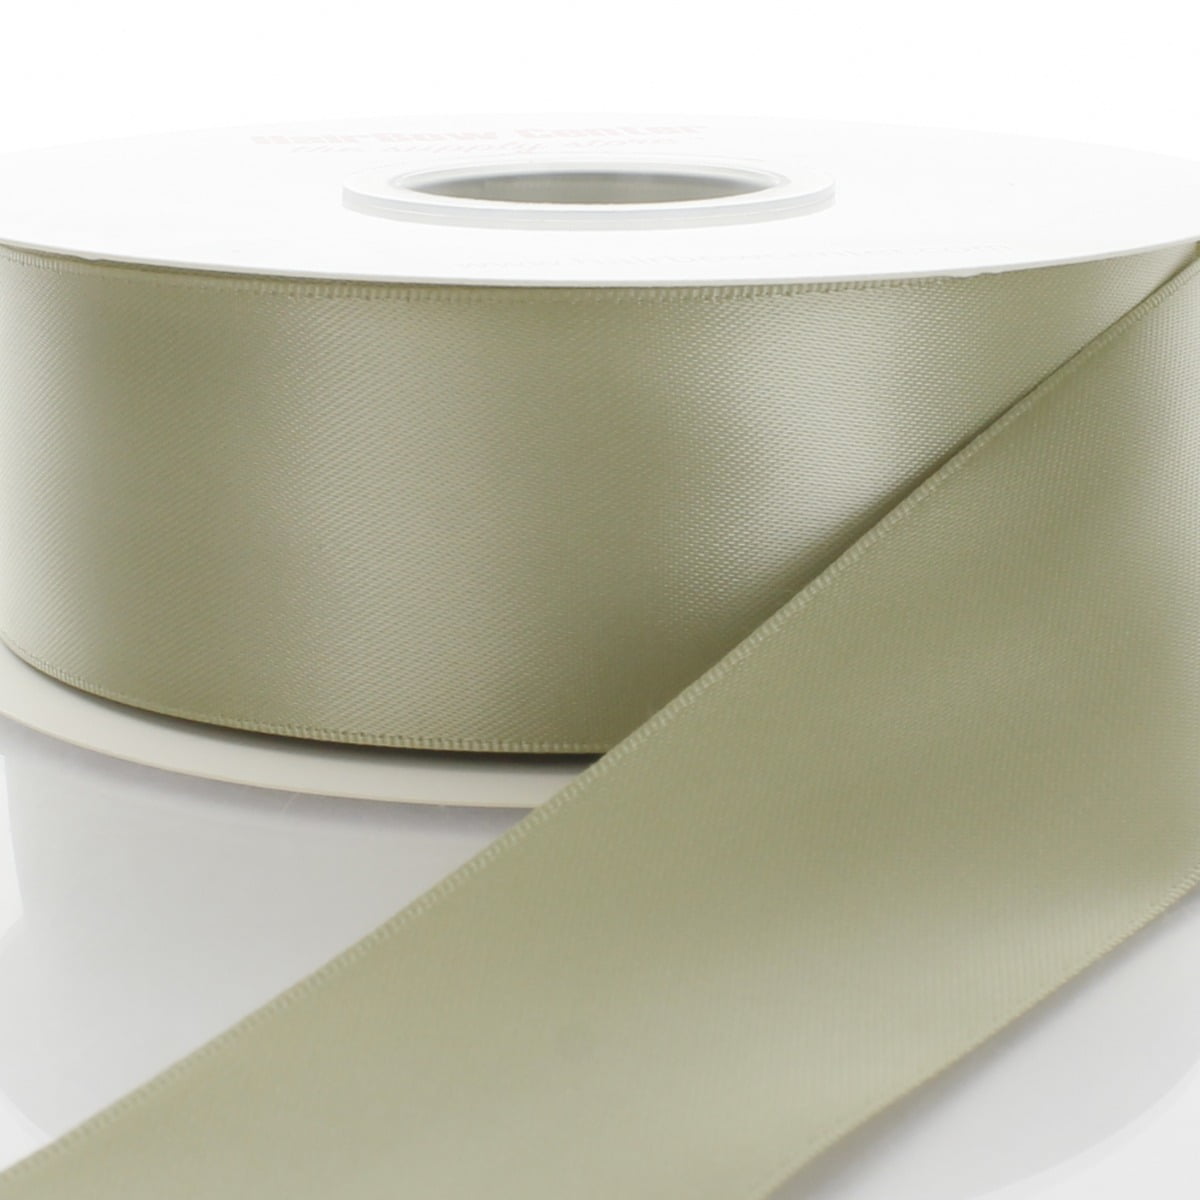 Lucia 25mm Italian Double Faced Satin Ribbon, Cream, Sold by The Yard